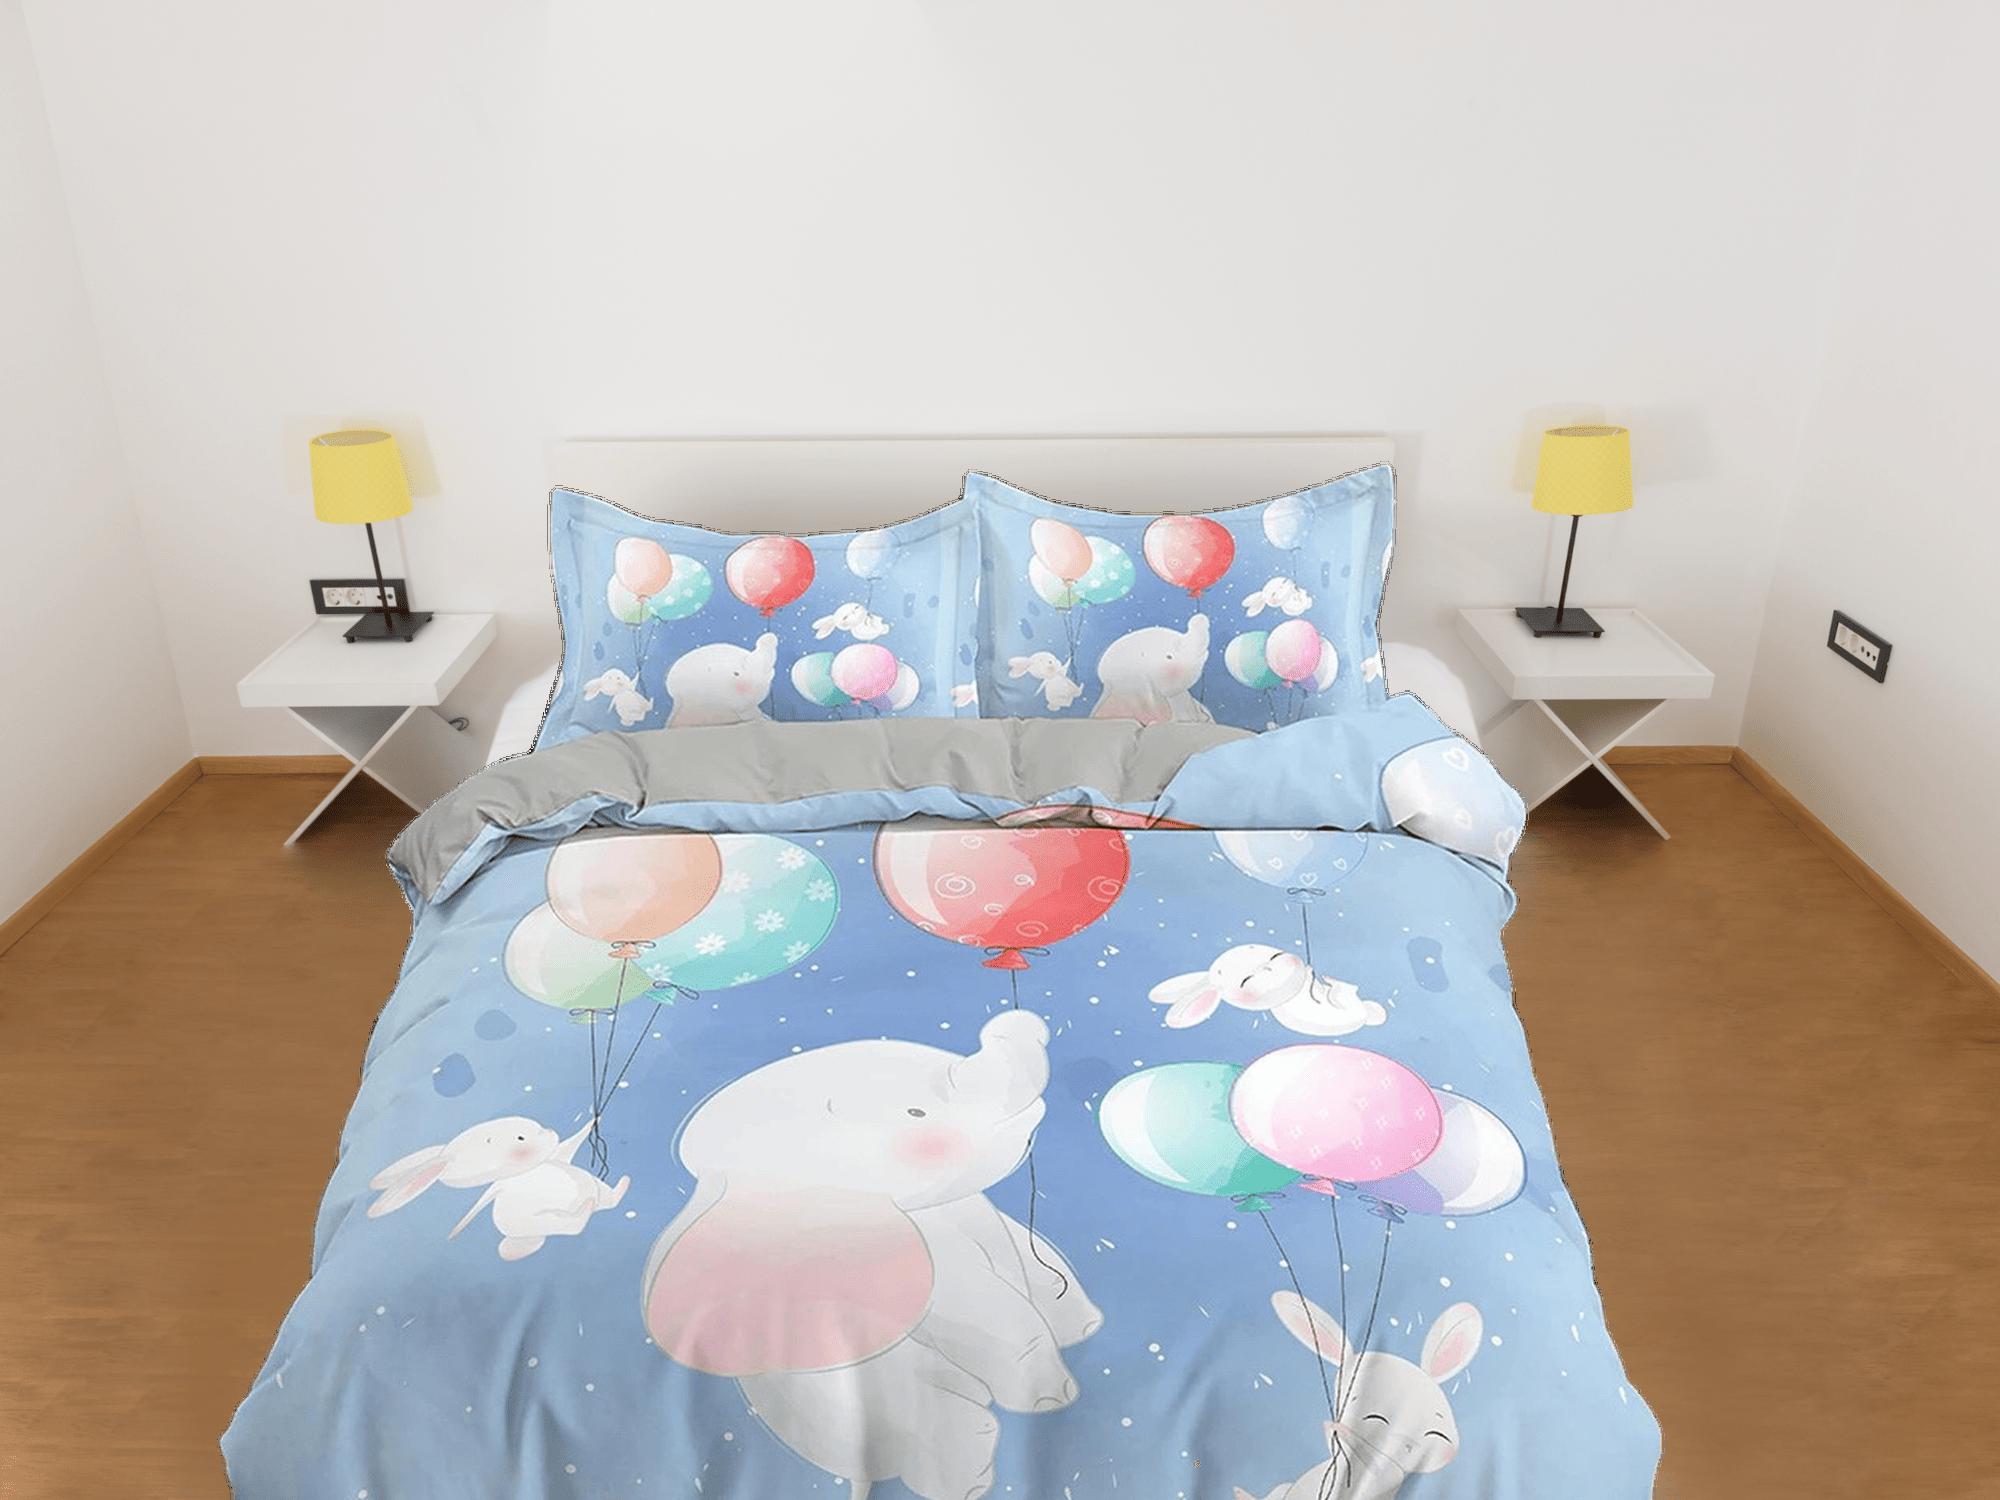 daintyduvet Flying elephant and bunny cute toddler bedding, unique duvet cover for nursery kids, crib bedding, baby zipper bedding, king queen full twin